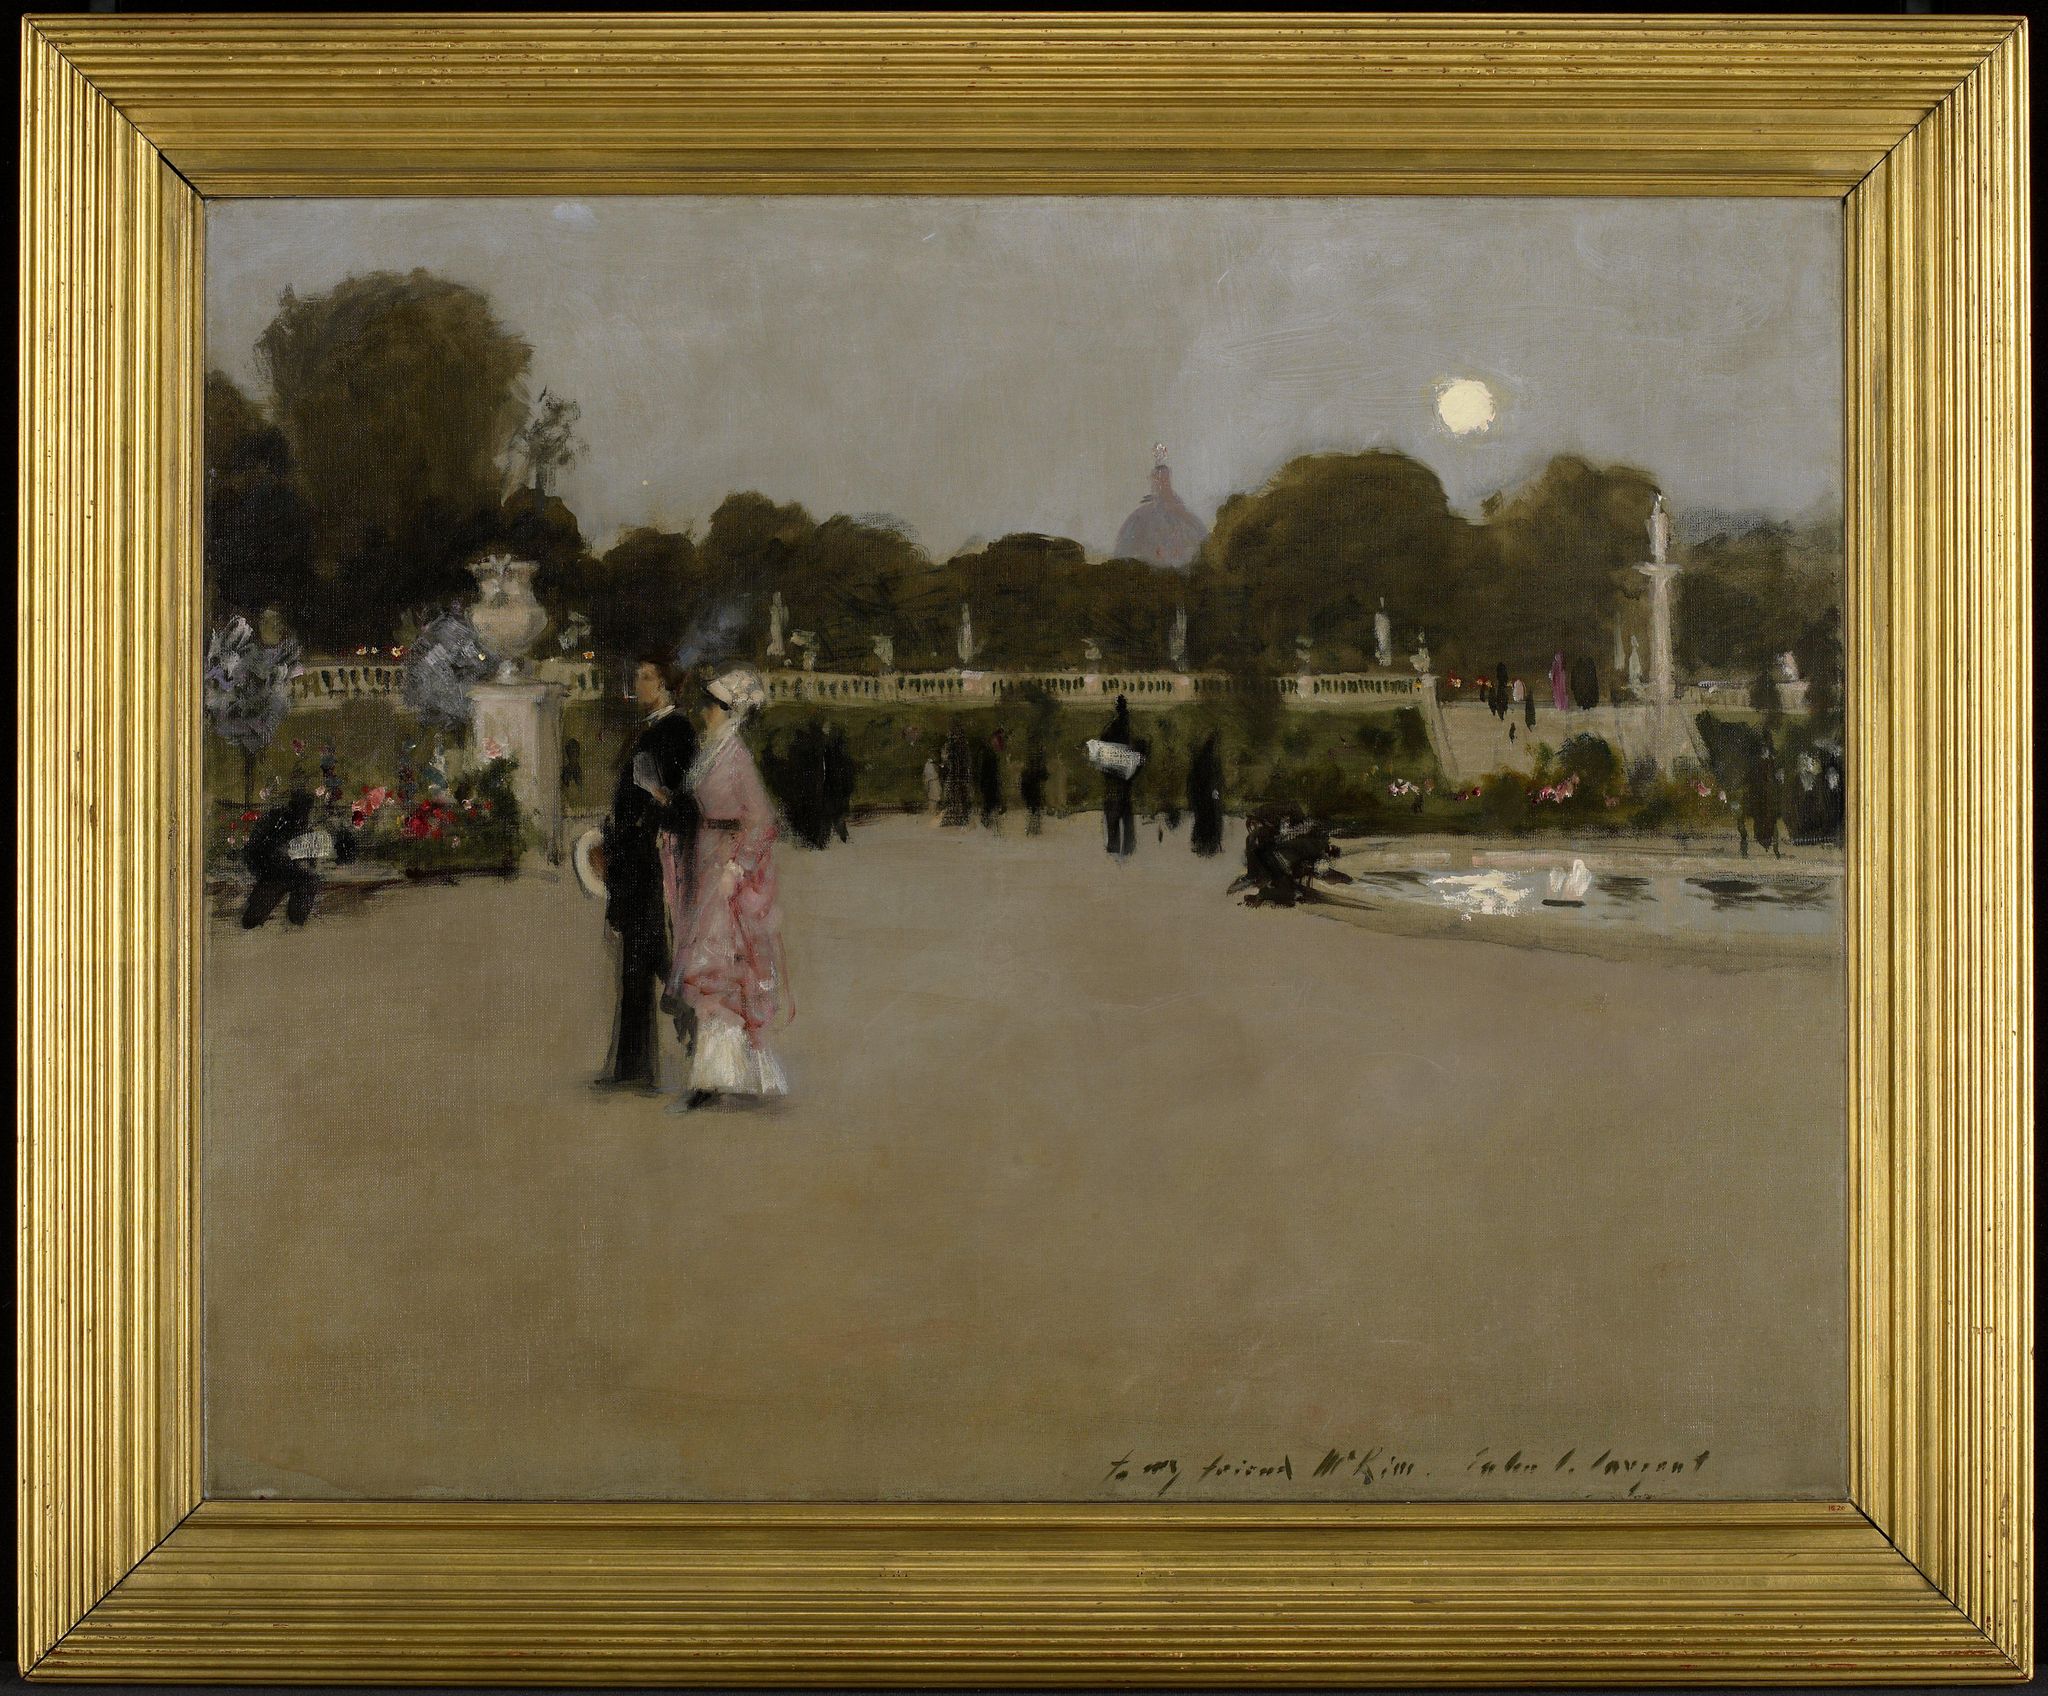 Luxembourg Gardens at Twilight